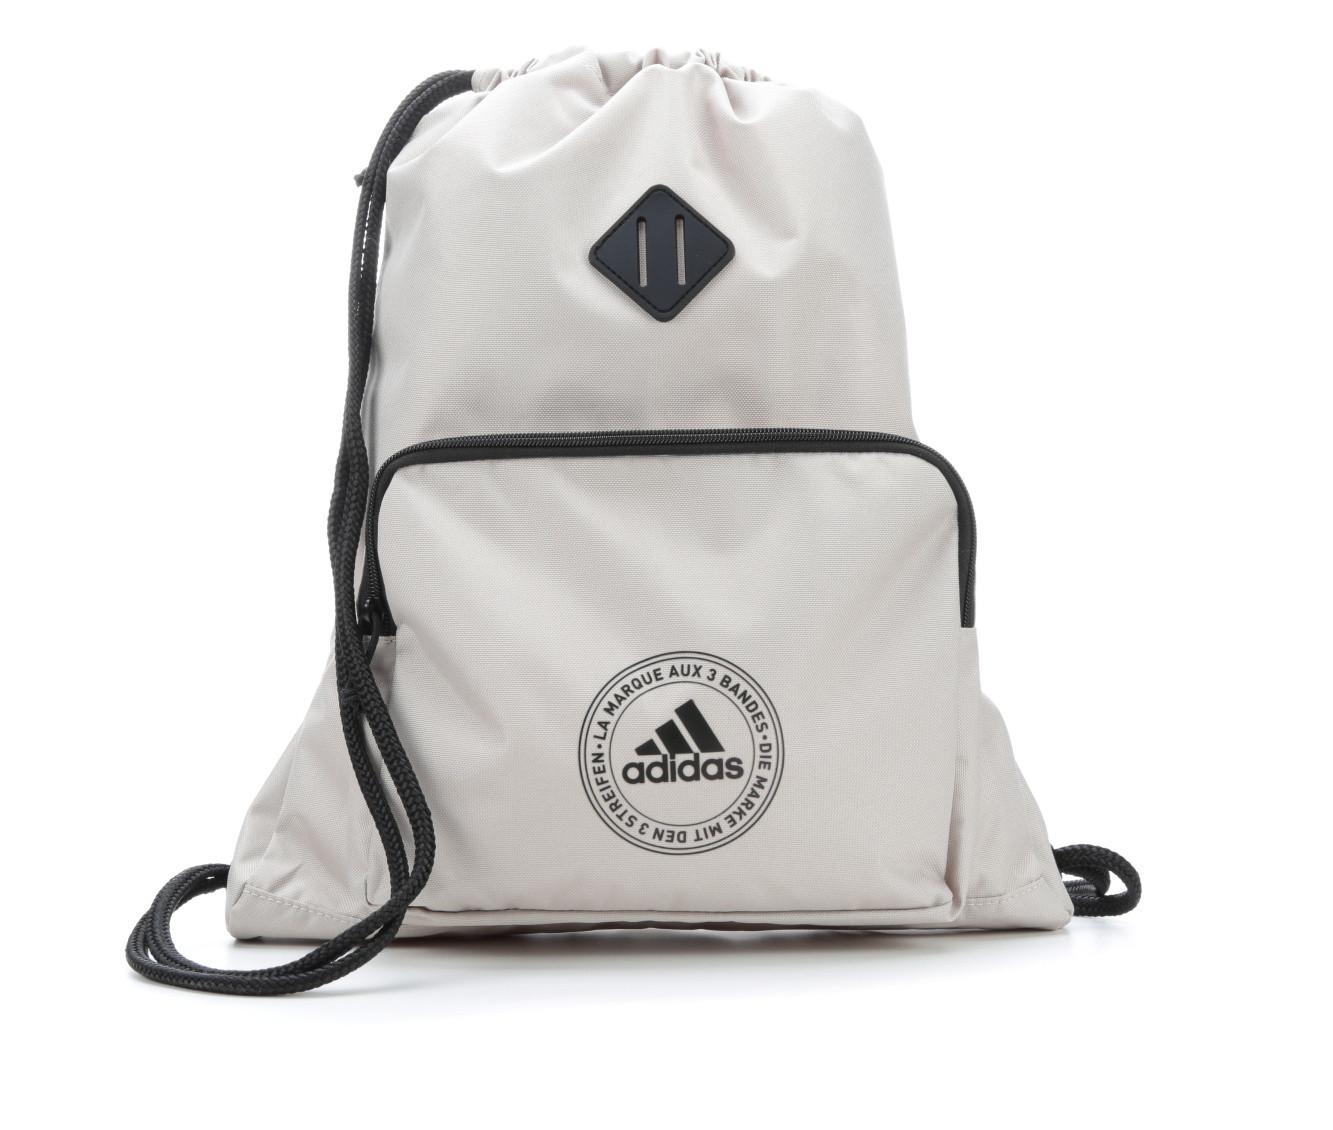 Adidas Classic 3S 2 Sackpack